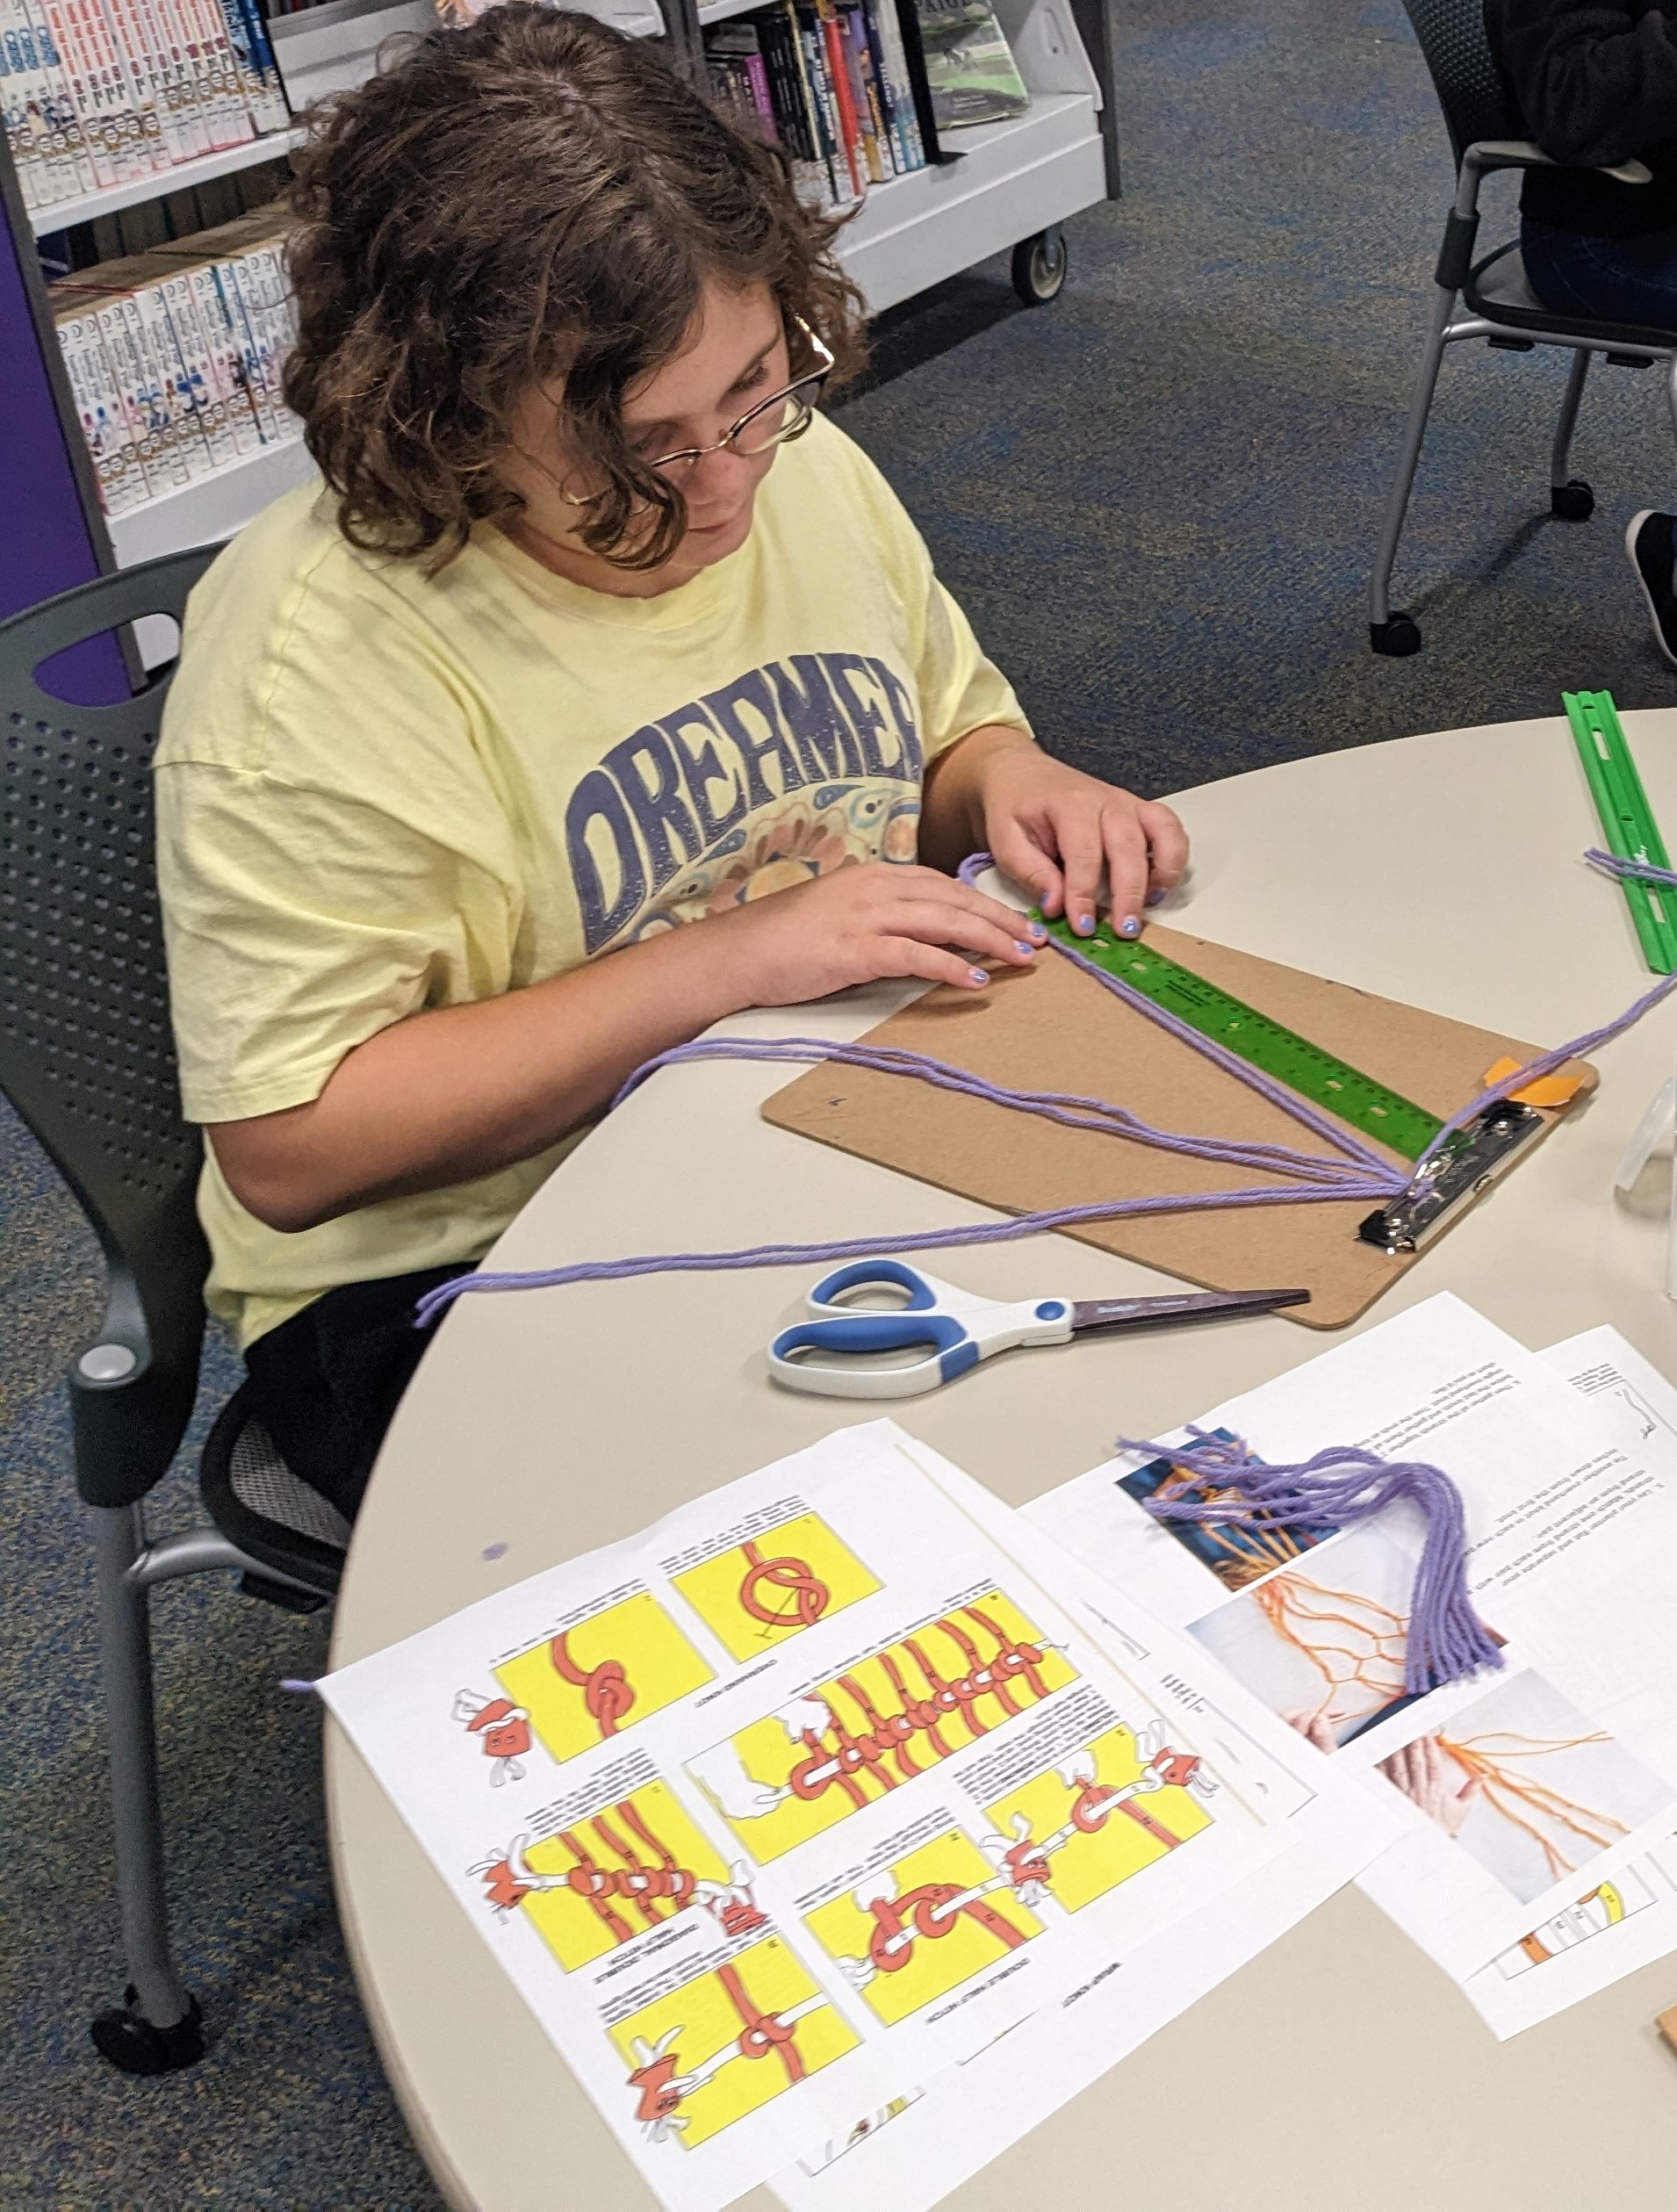 Teen in yellow shirt working with purple yarn to create a macramé project